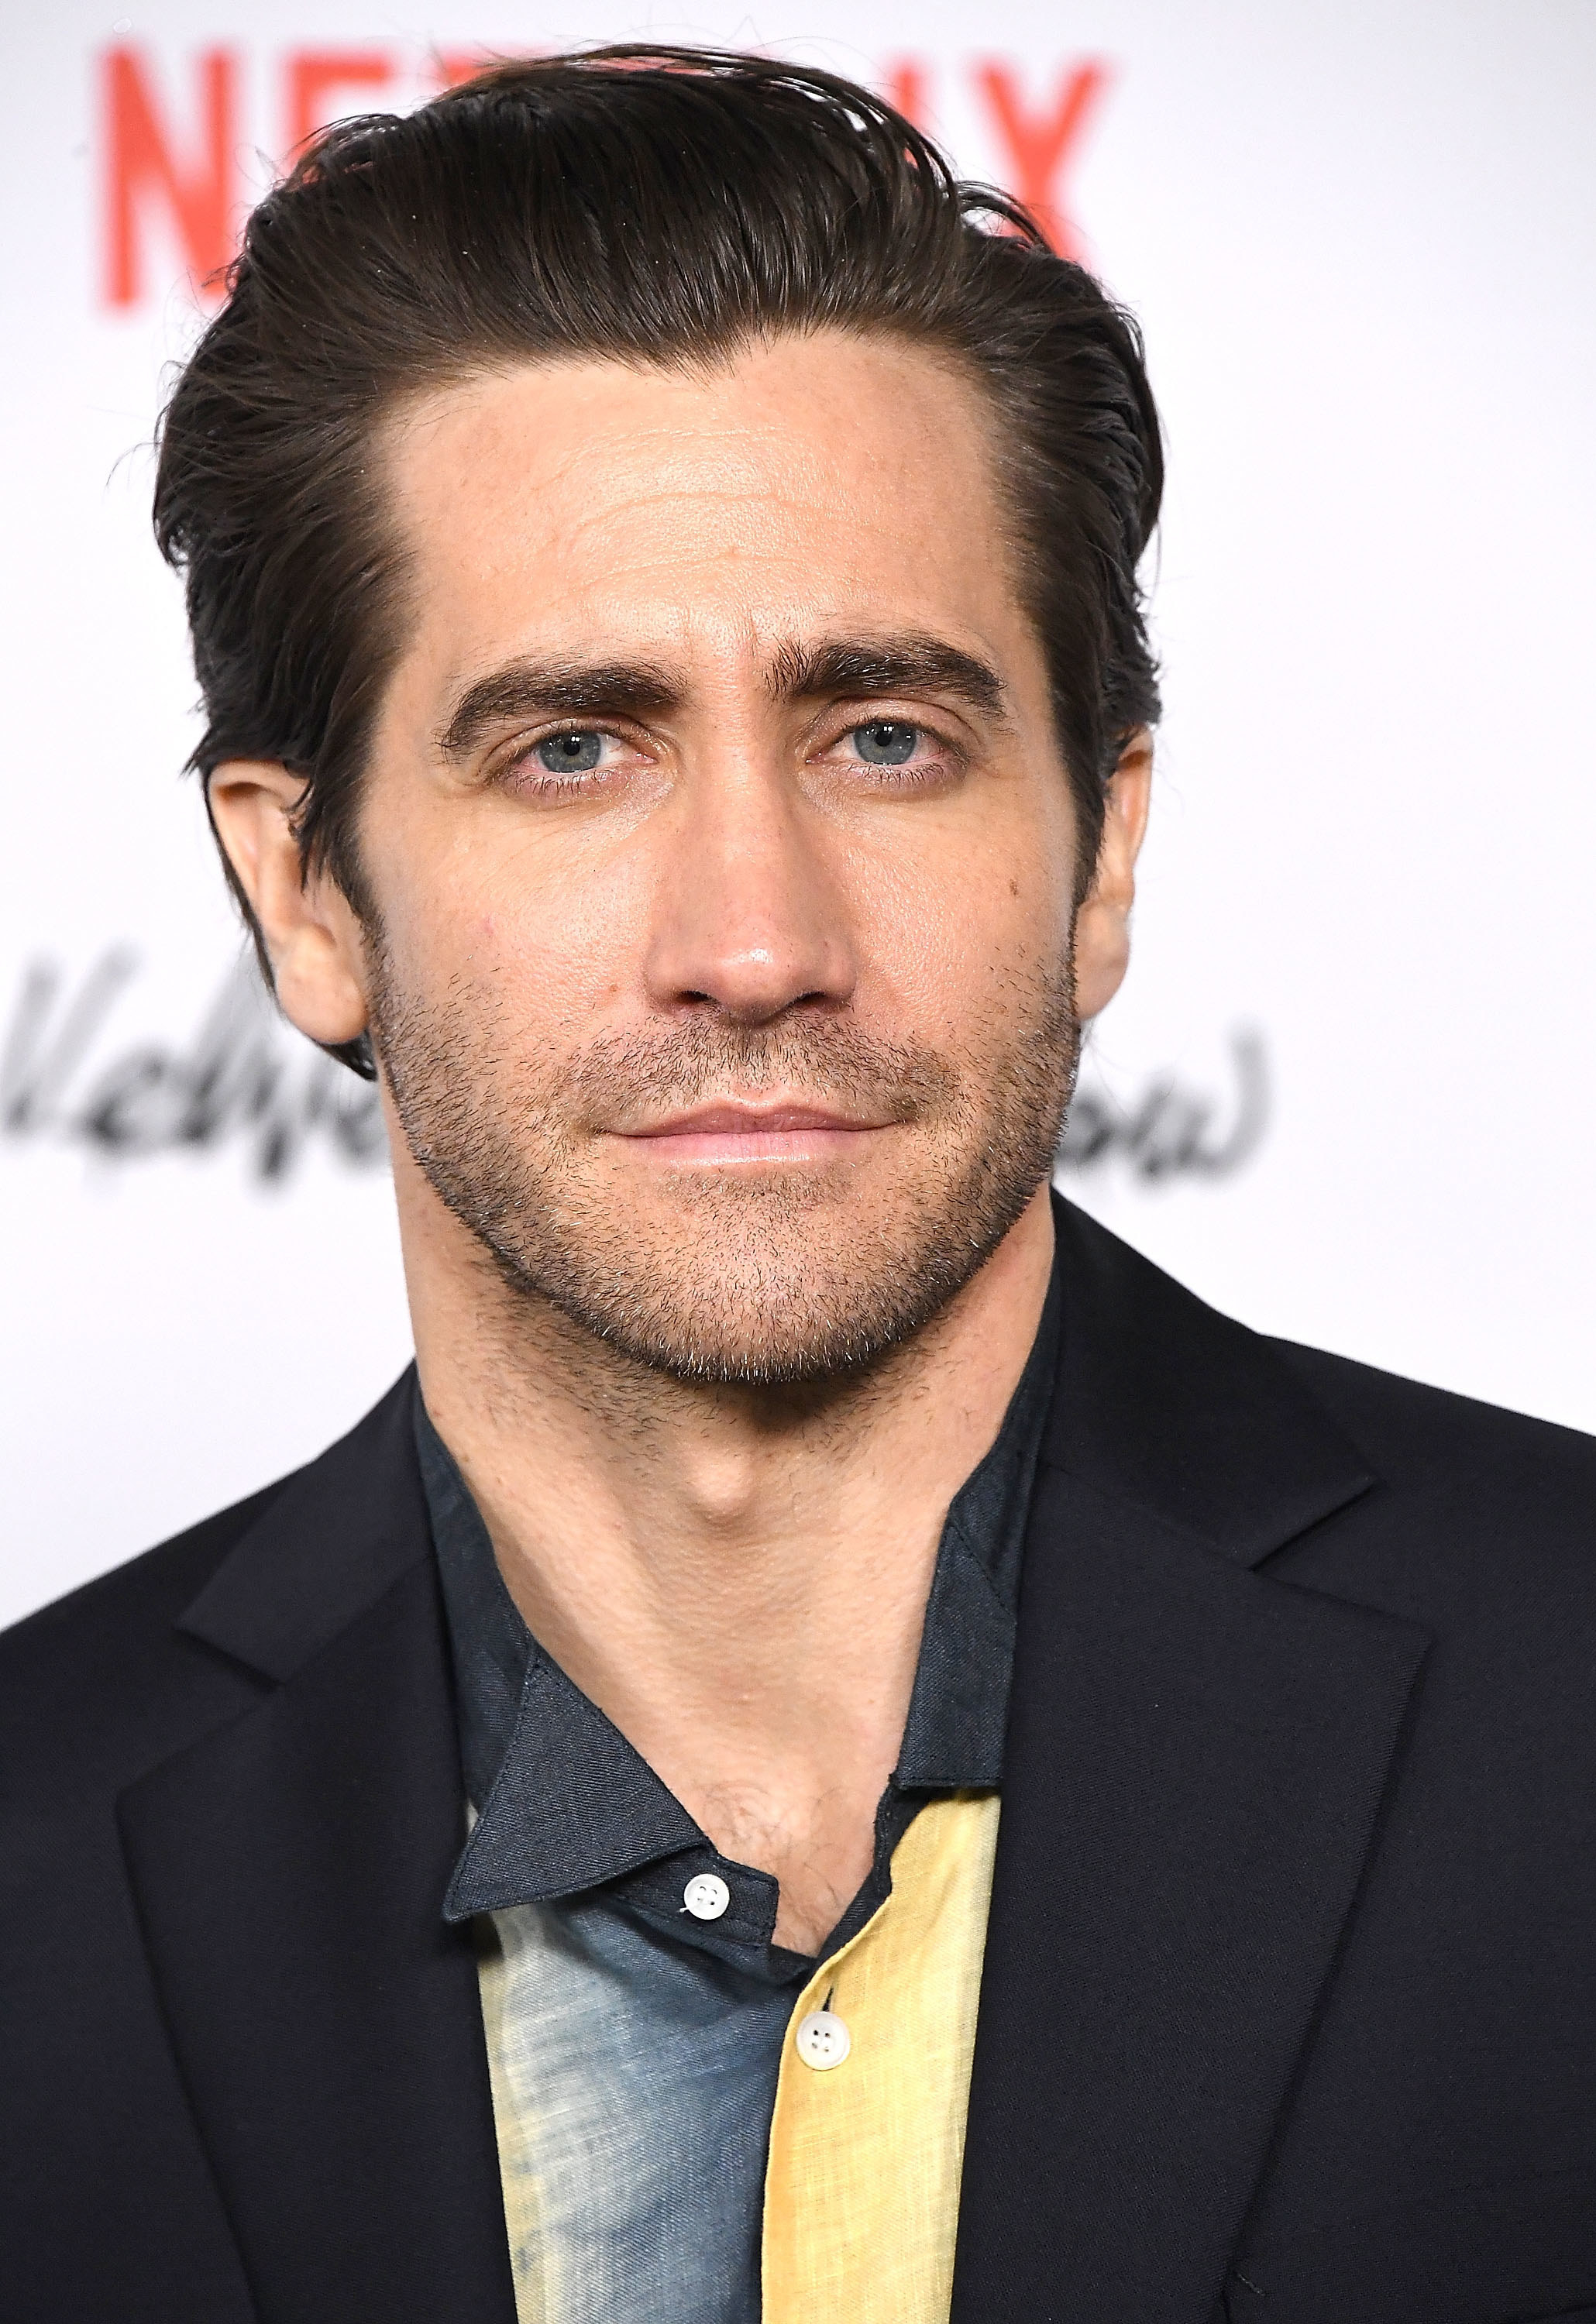 Jake on the red carpet in 2019